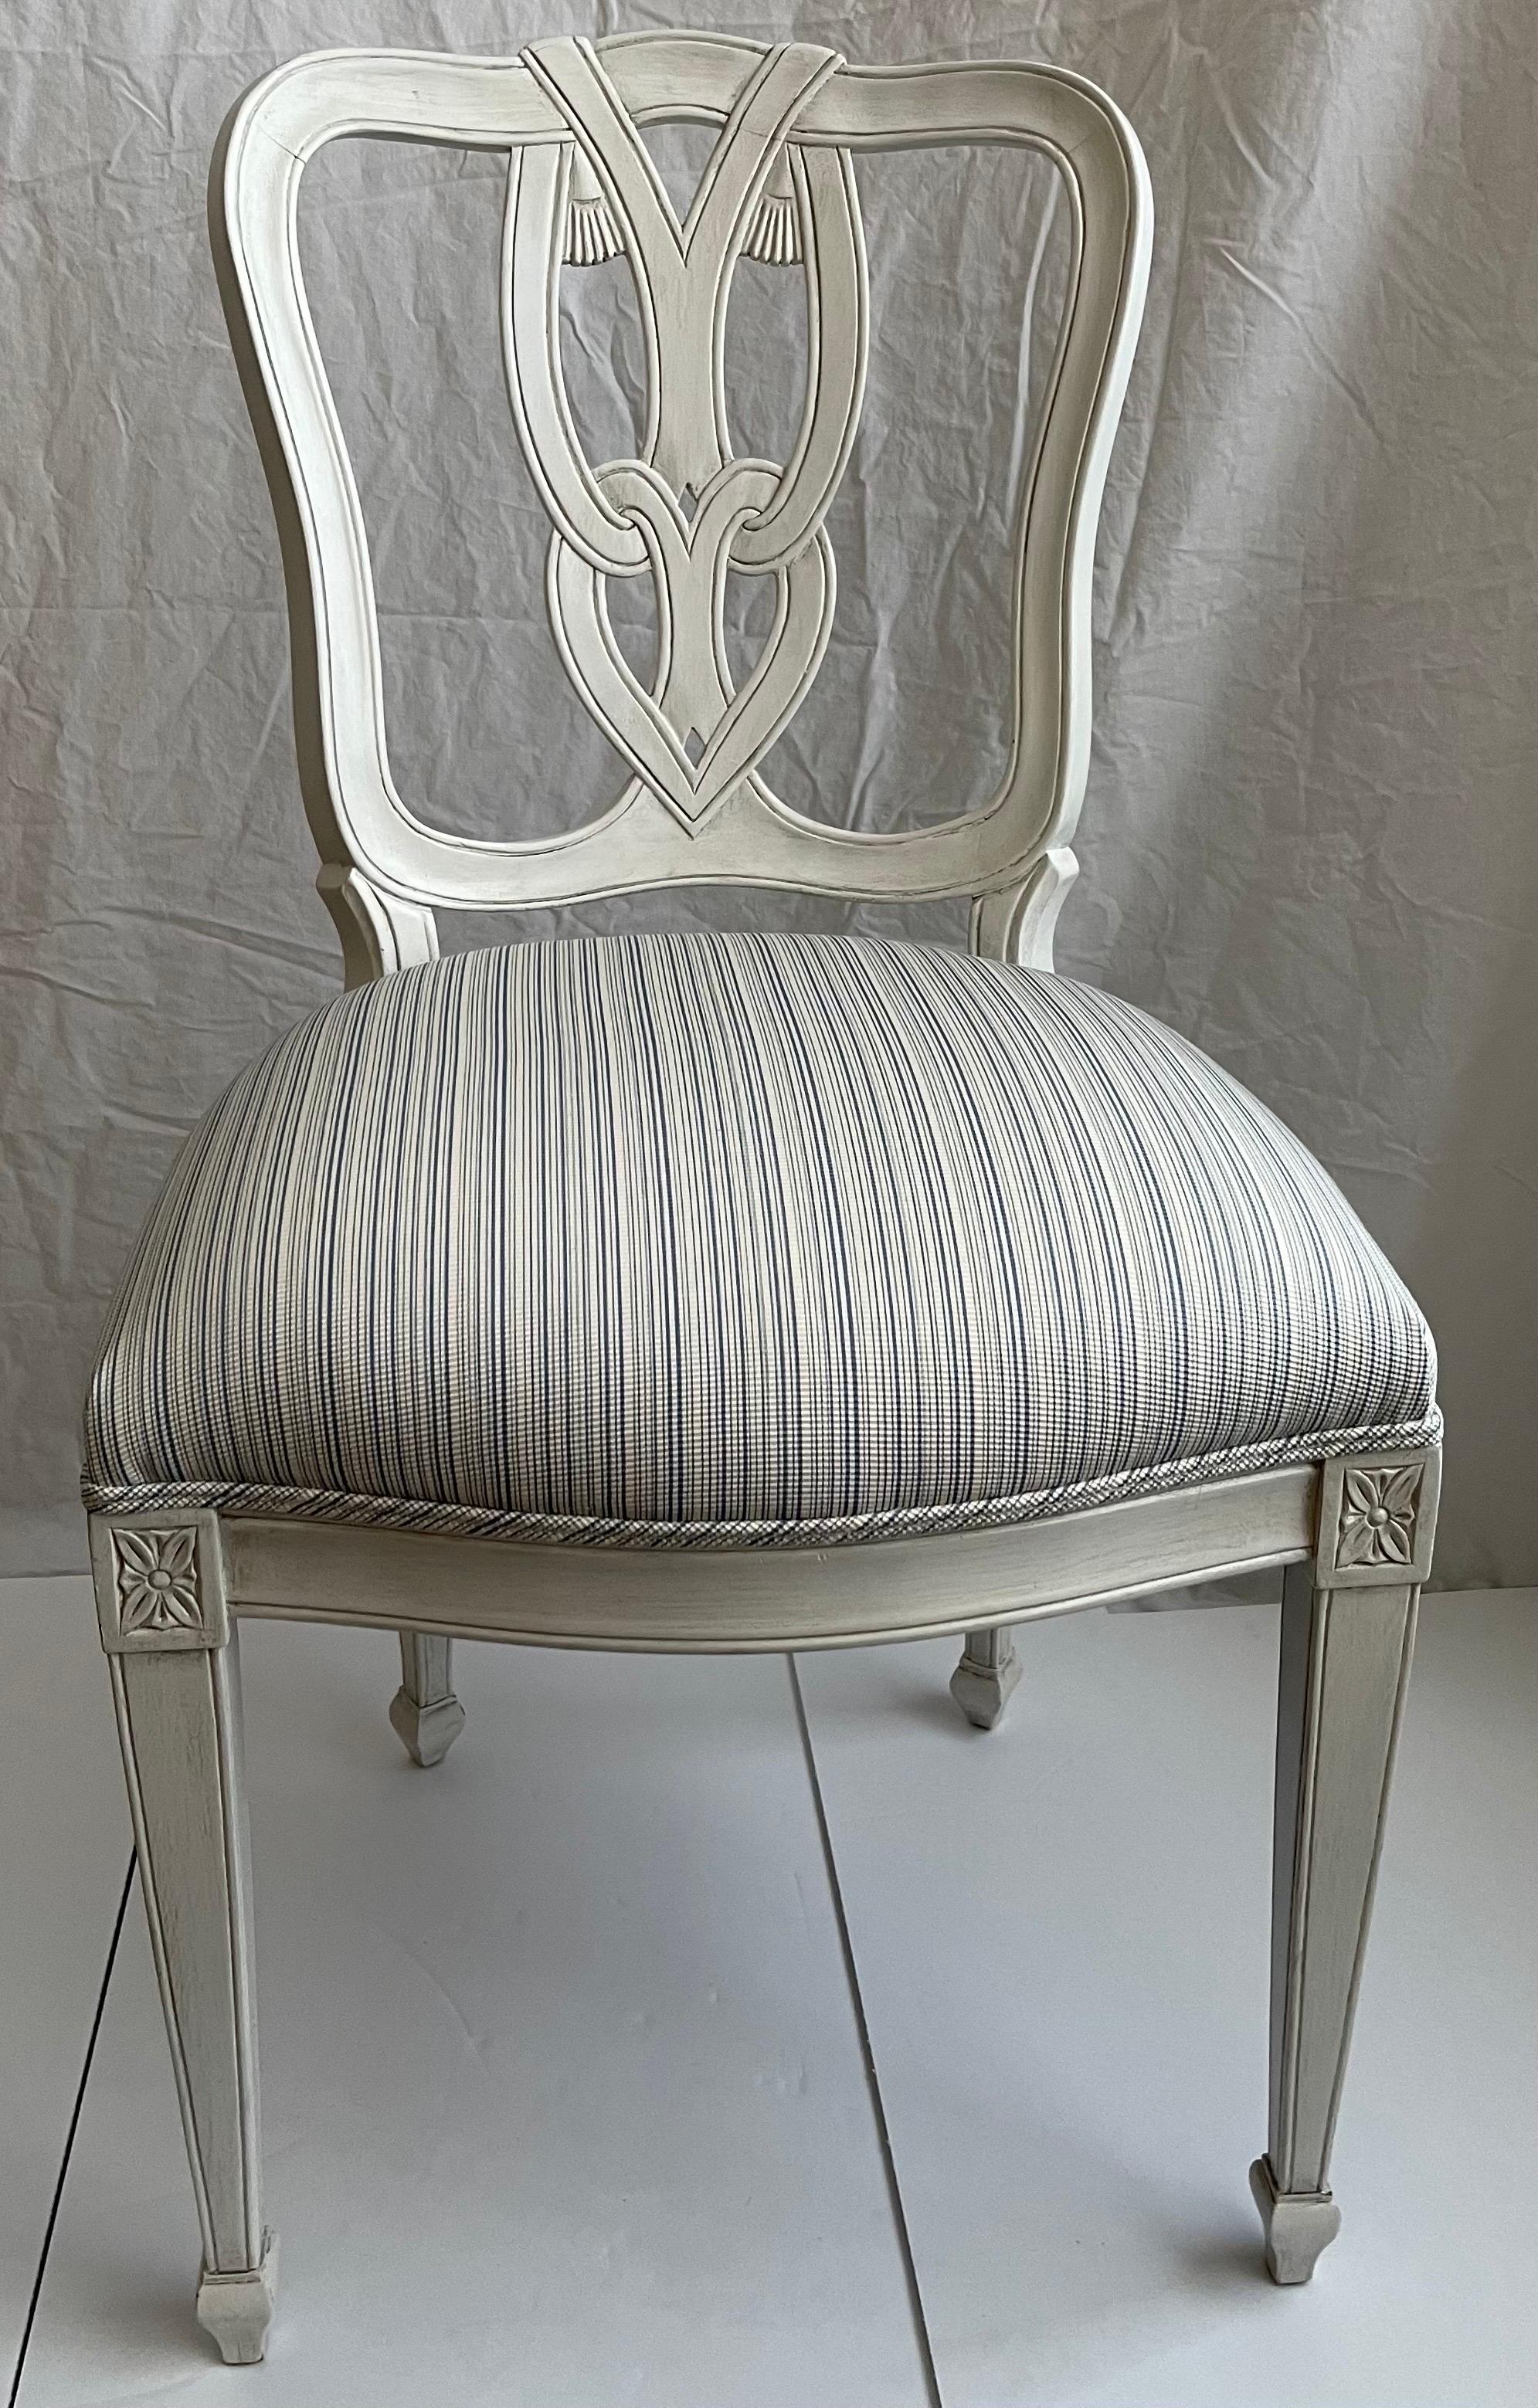 Hollywood Regency style tassel motif side chair. Newly repainted in antique white painted finish. Newly upholstered in Schumacher woven cotton fabric in blue/white stripe. Seat is 18